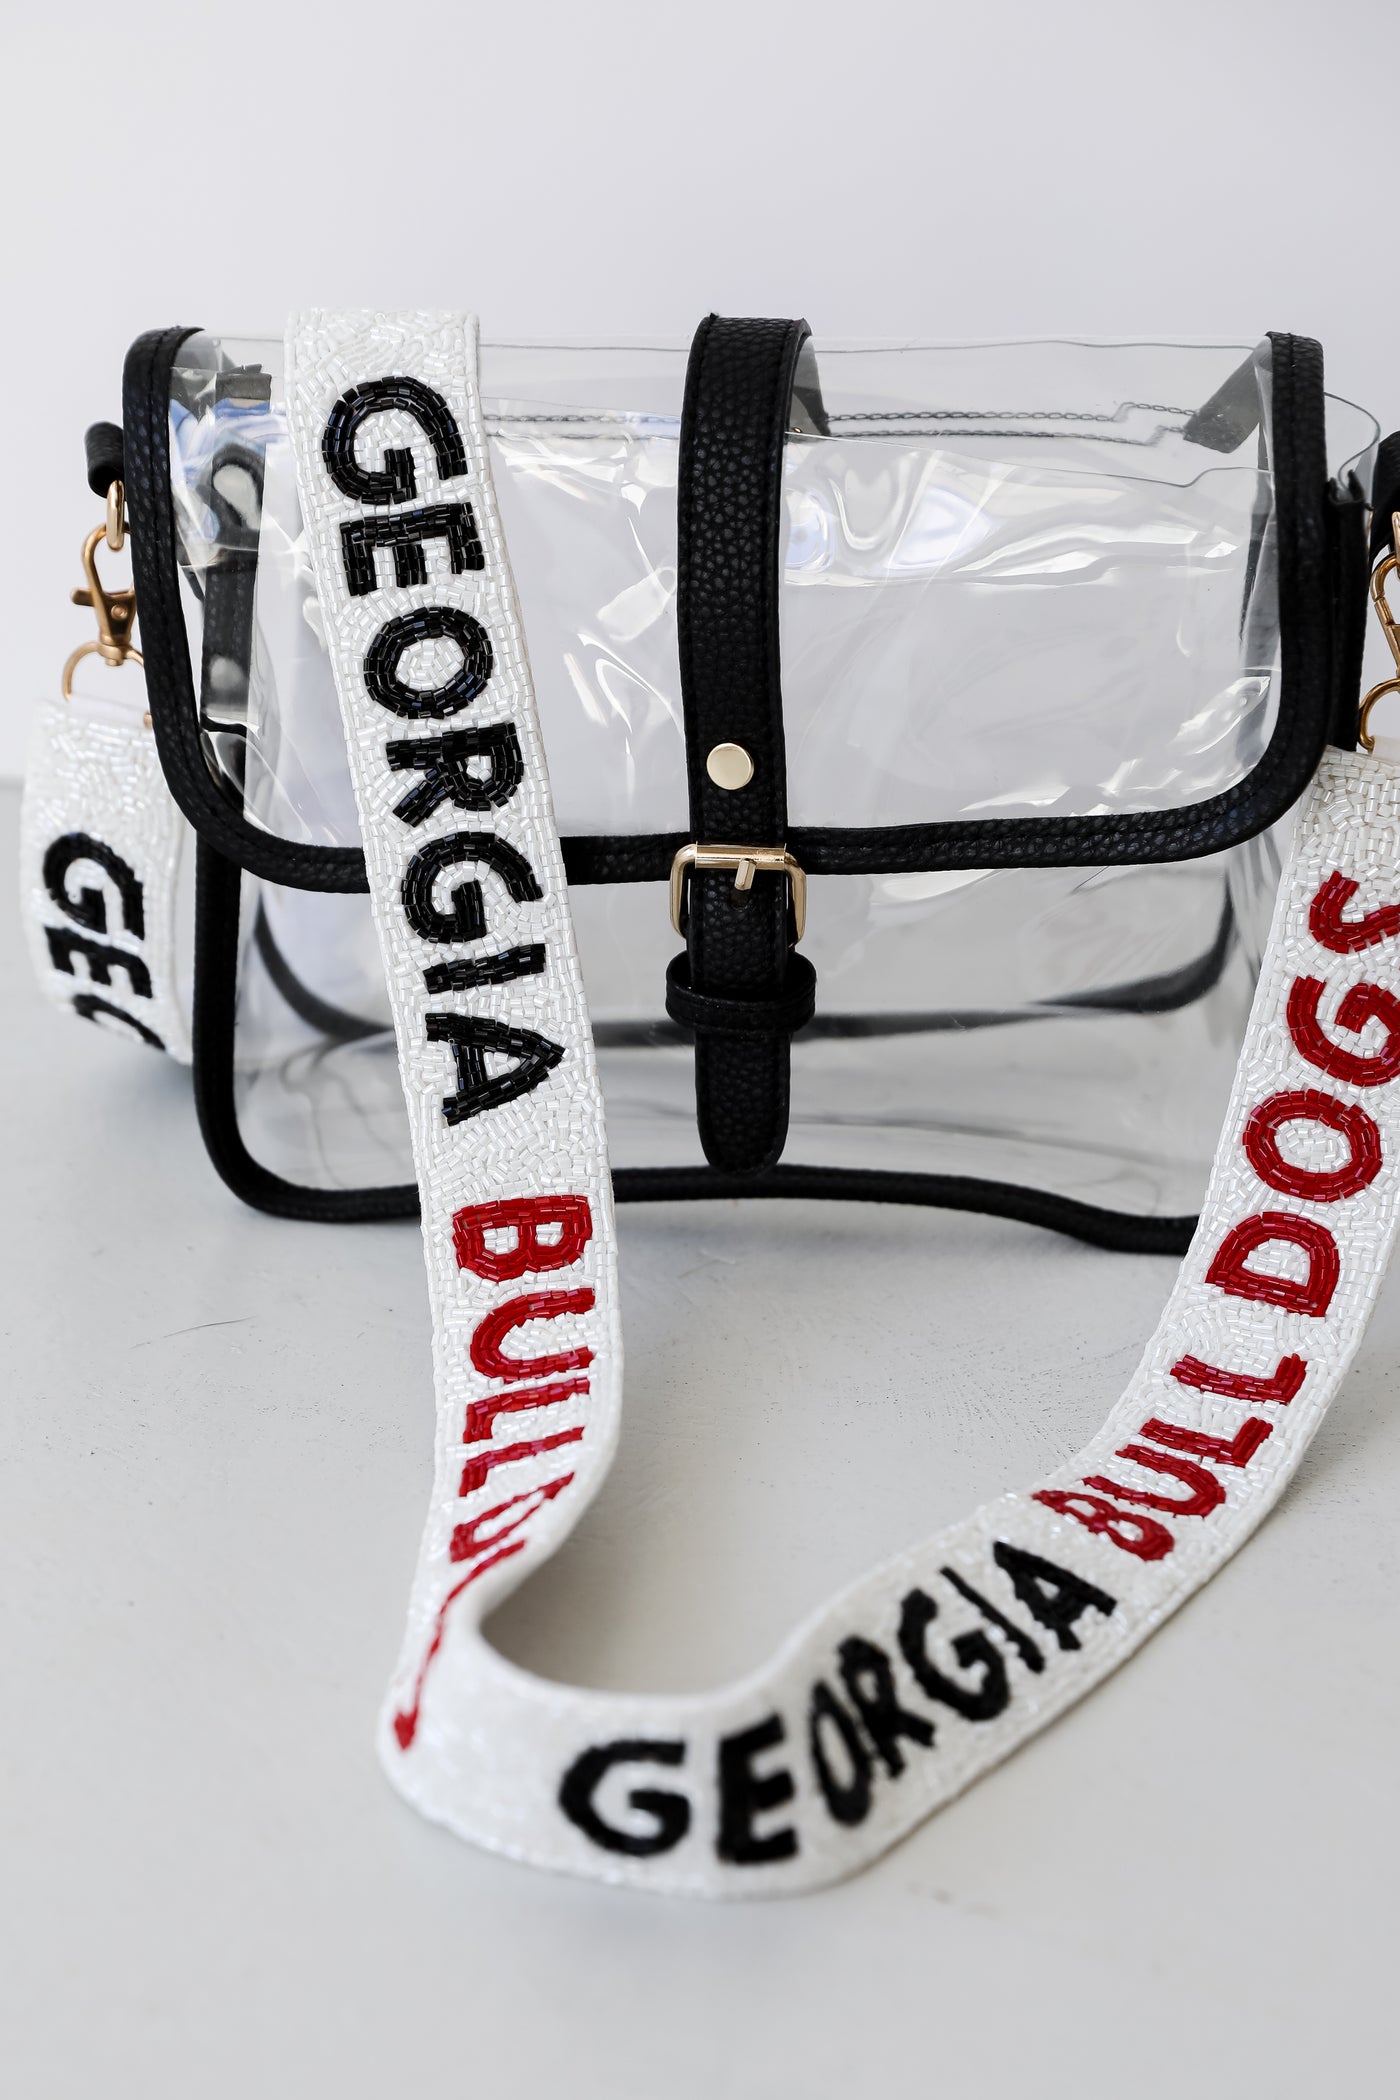 Buy Georgia Red And Black Purse Strap Online